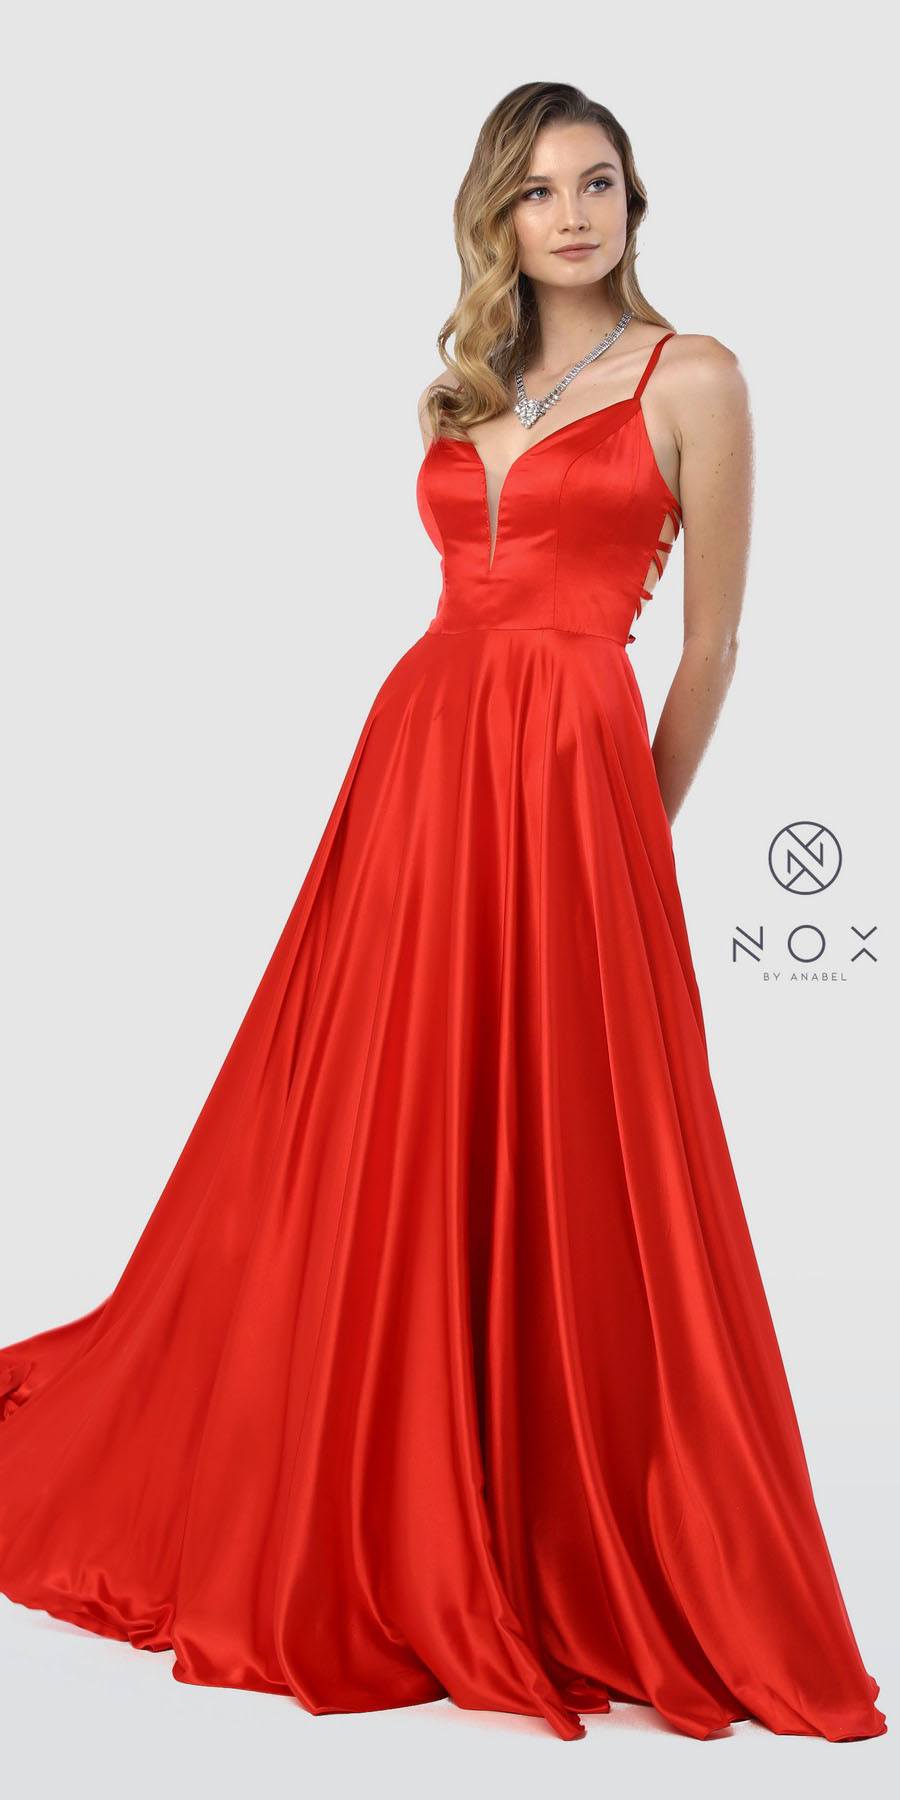 red strappy back prom dress